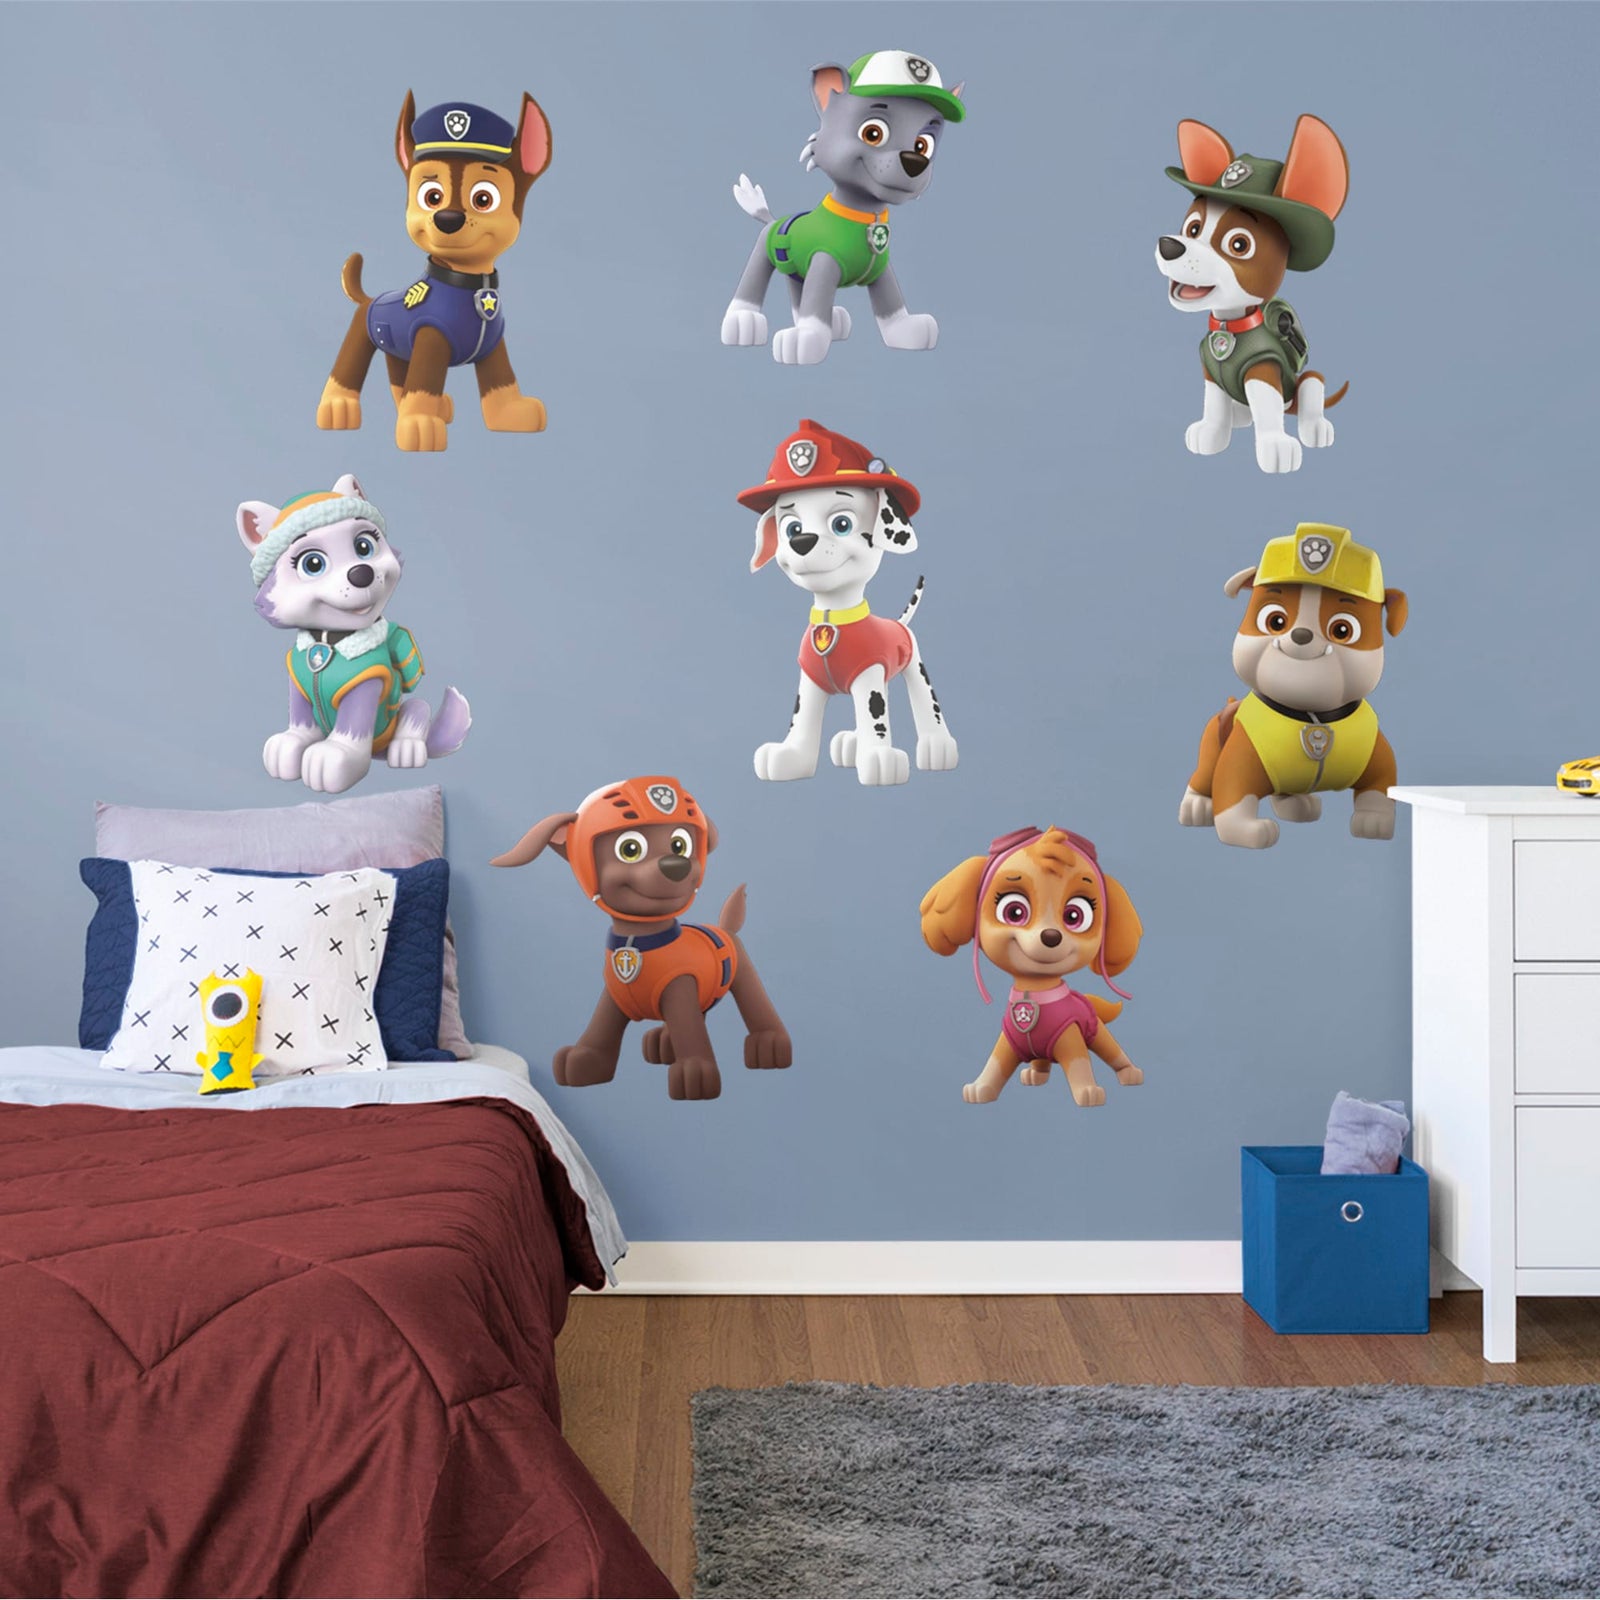 PAW Patrol: Collection - Officially Licensed Removable Wall Decals Fathead LLC